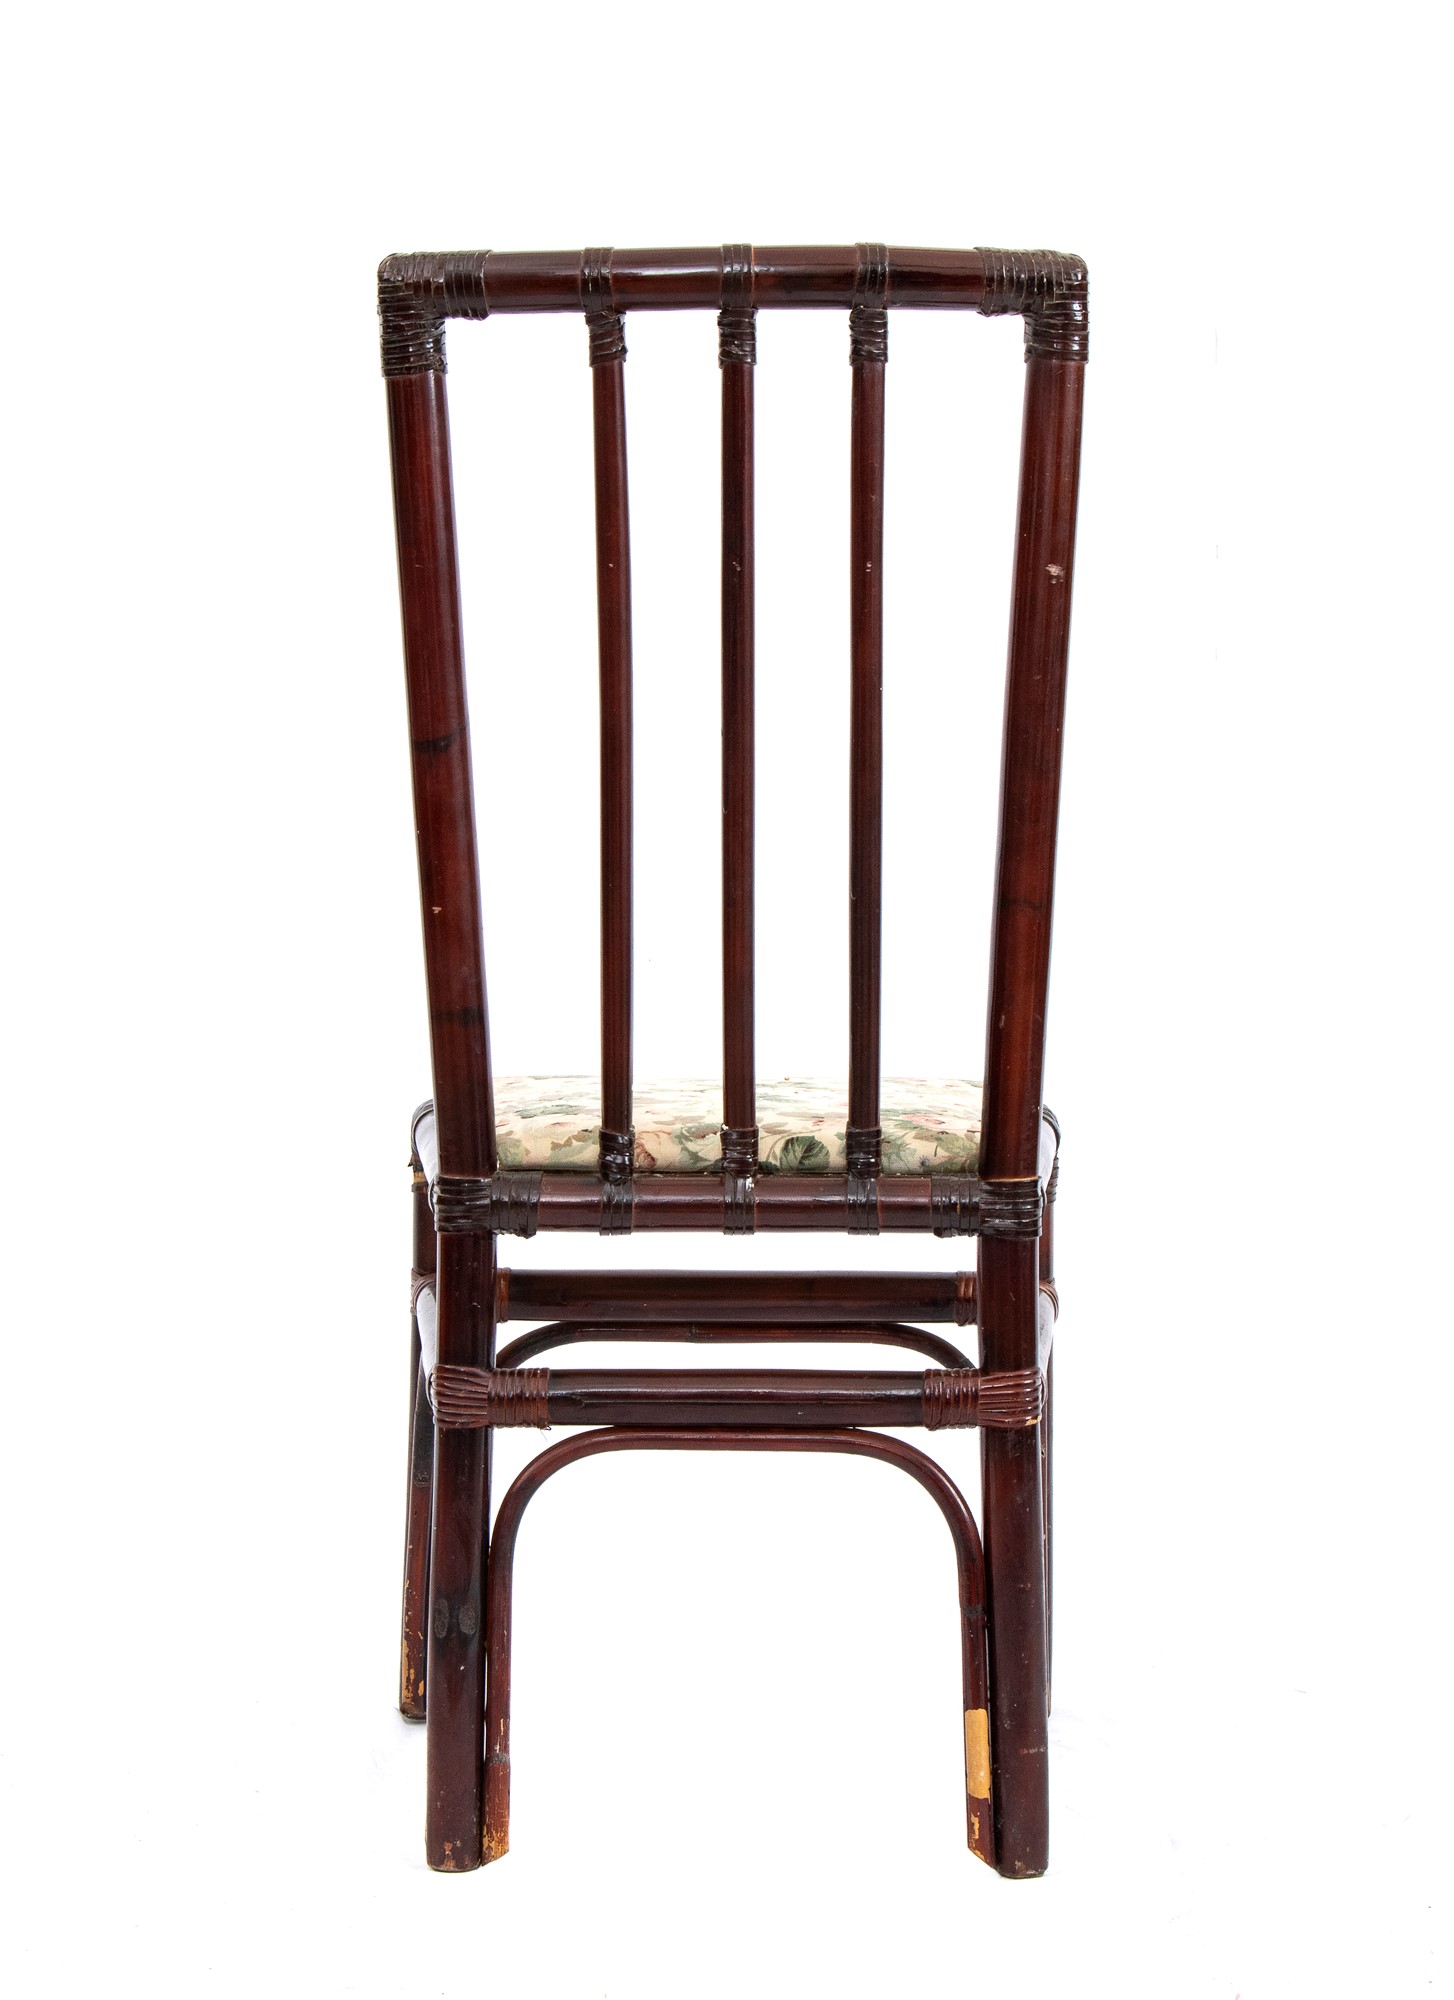 Six chairs with lacquered bamboo structure - Image 15 of 15